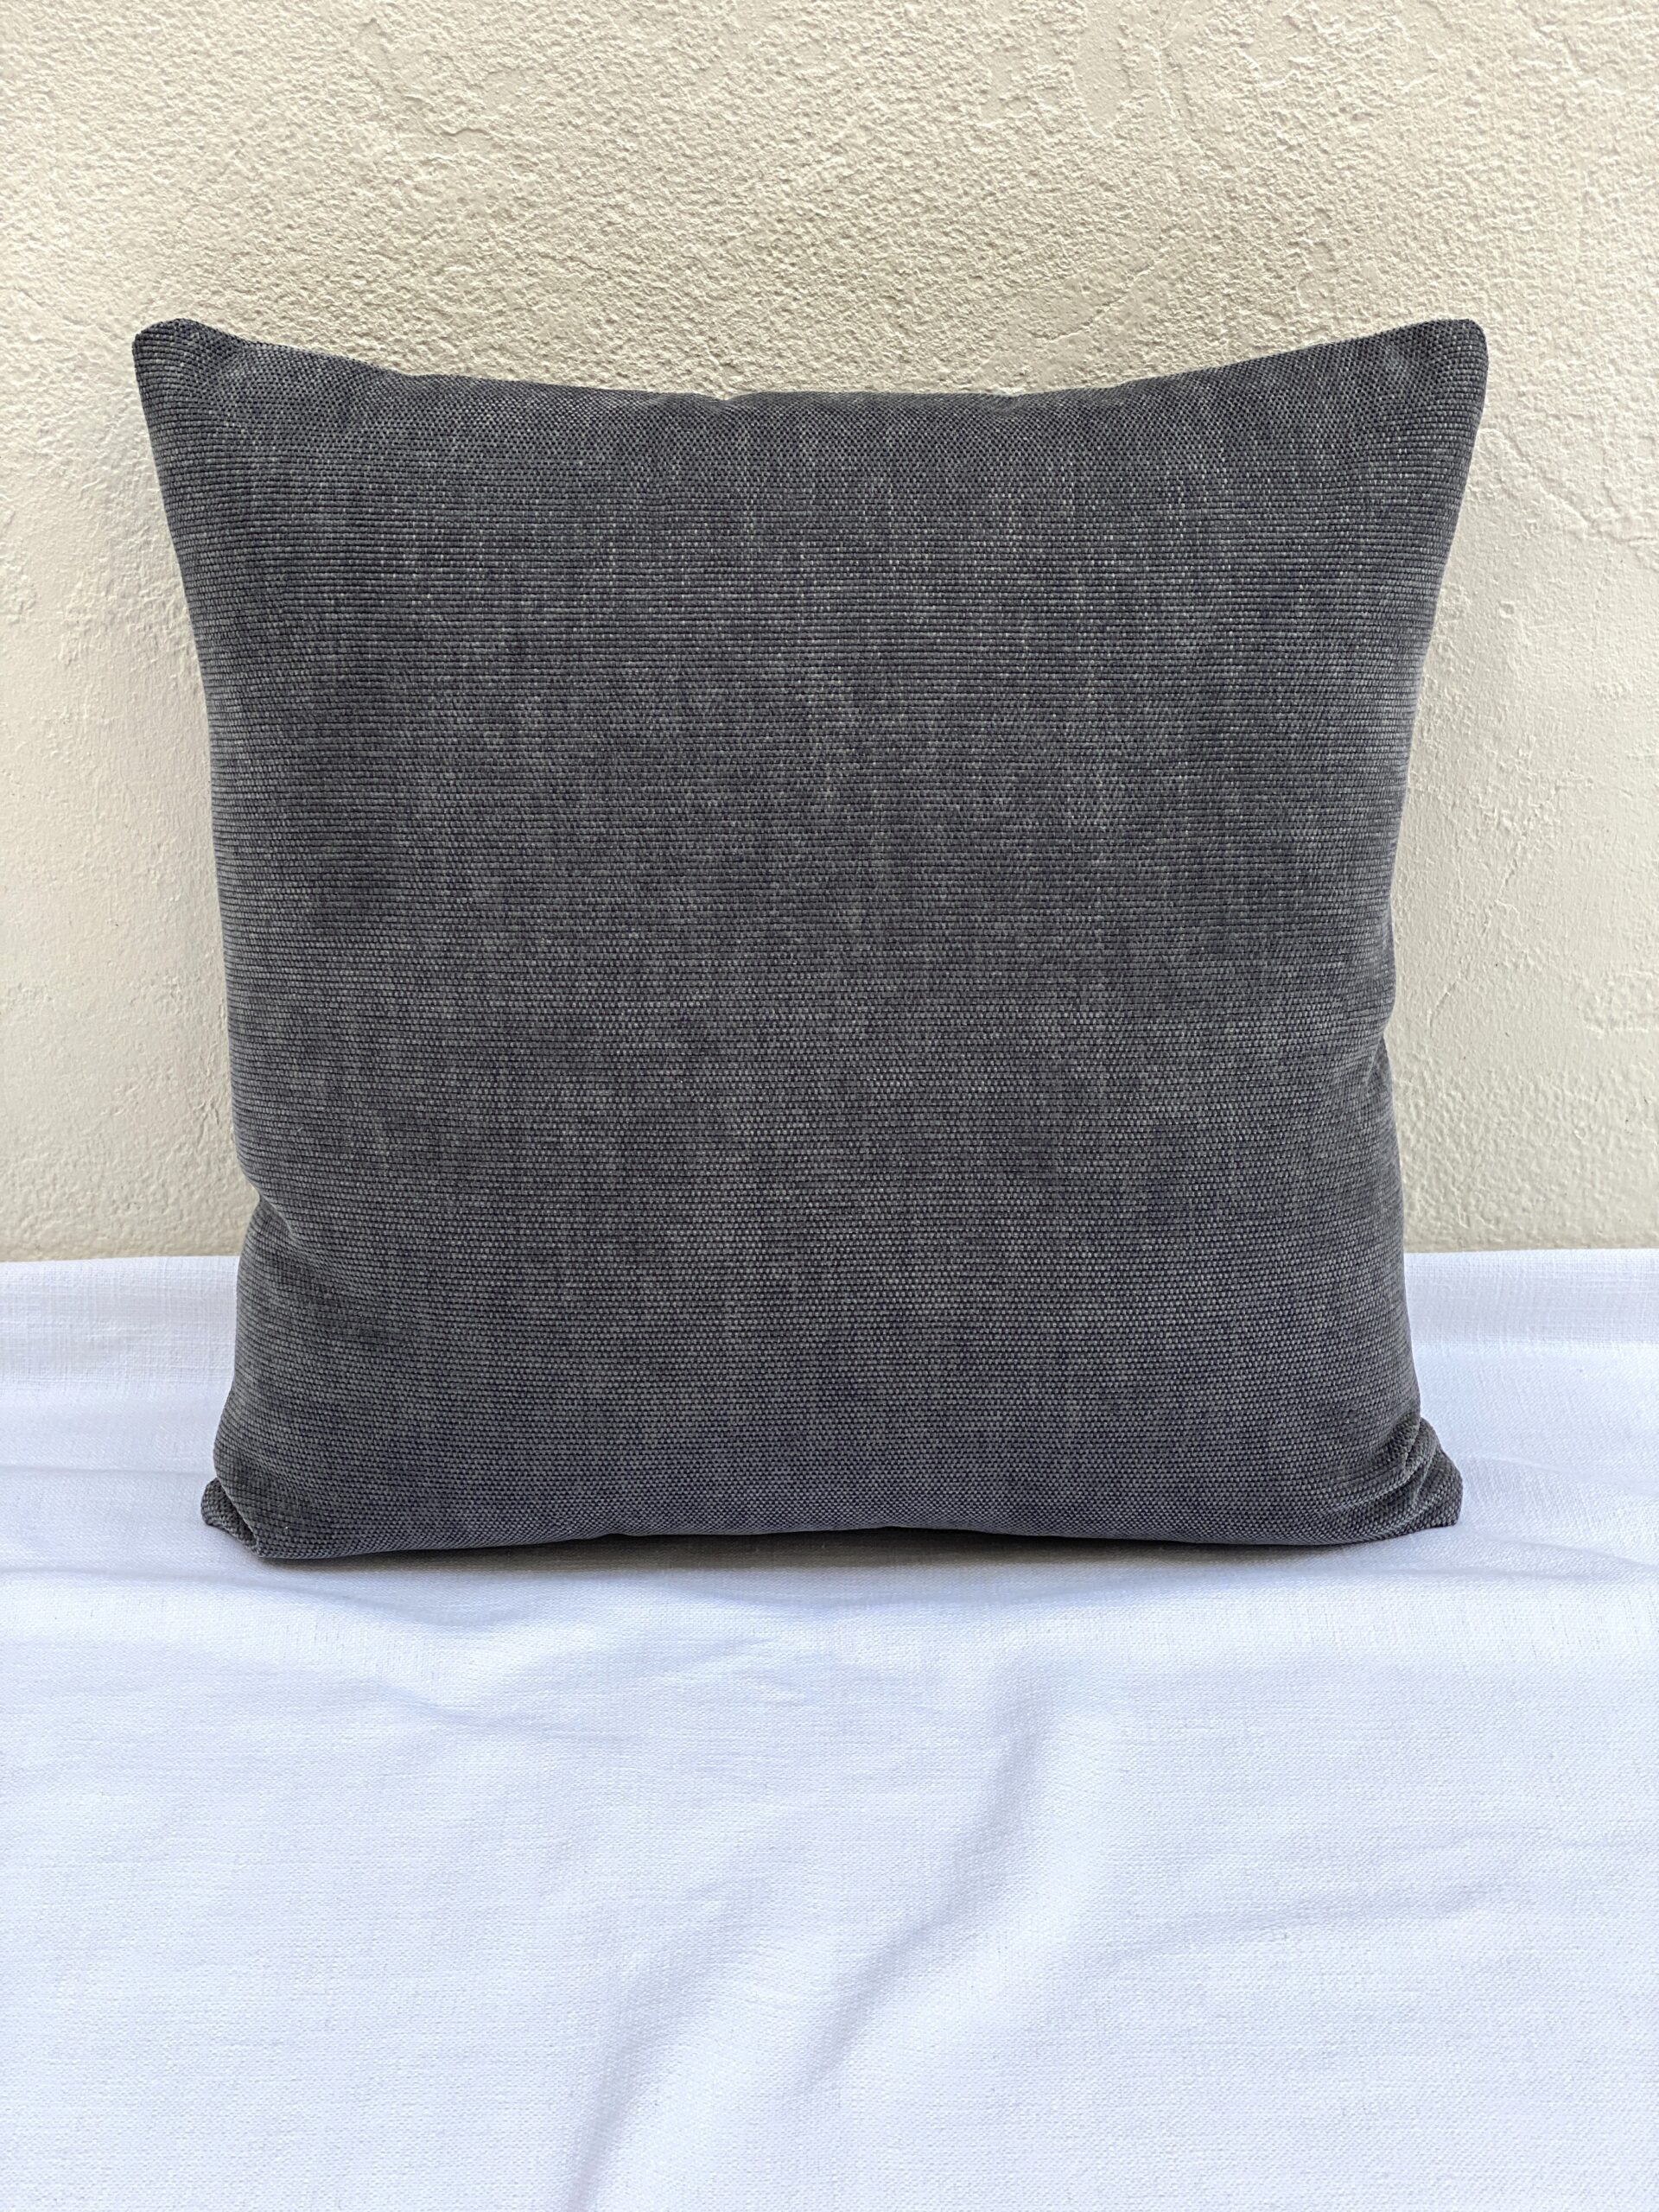 Tonic Living Remy Pillows